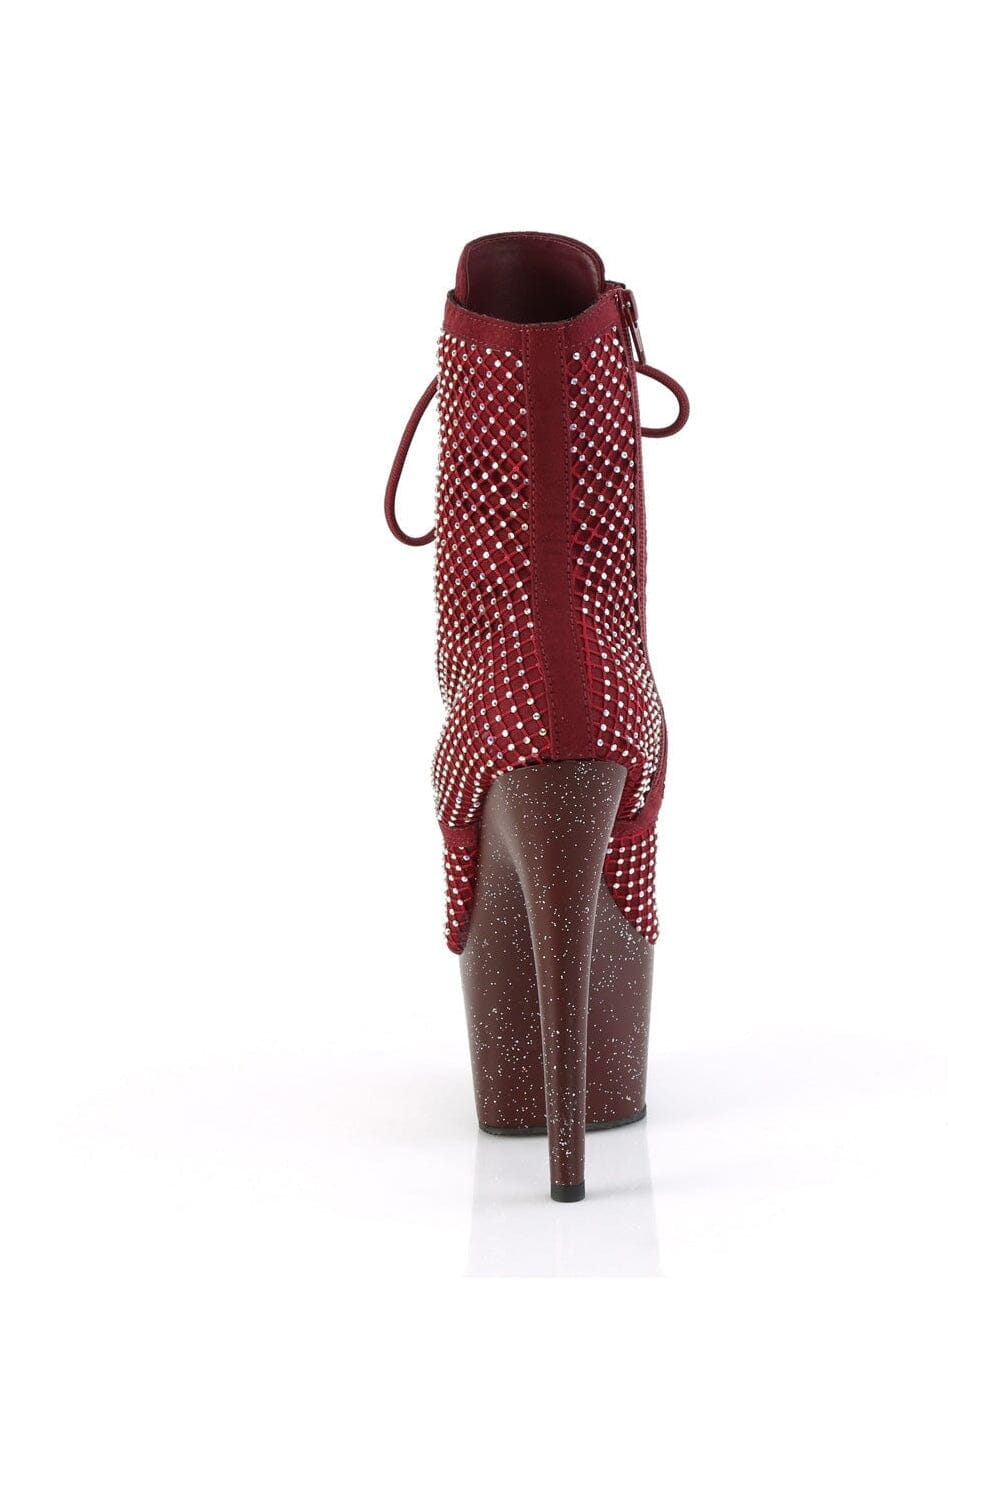 ADORE-1020RM Burgundy Faux Suede Ankle Boot-Ankle Boots-Pleaser-SEXYSHOES.COM